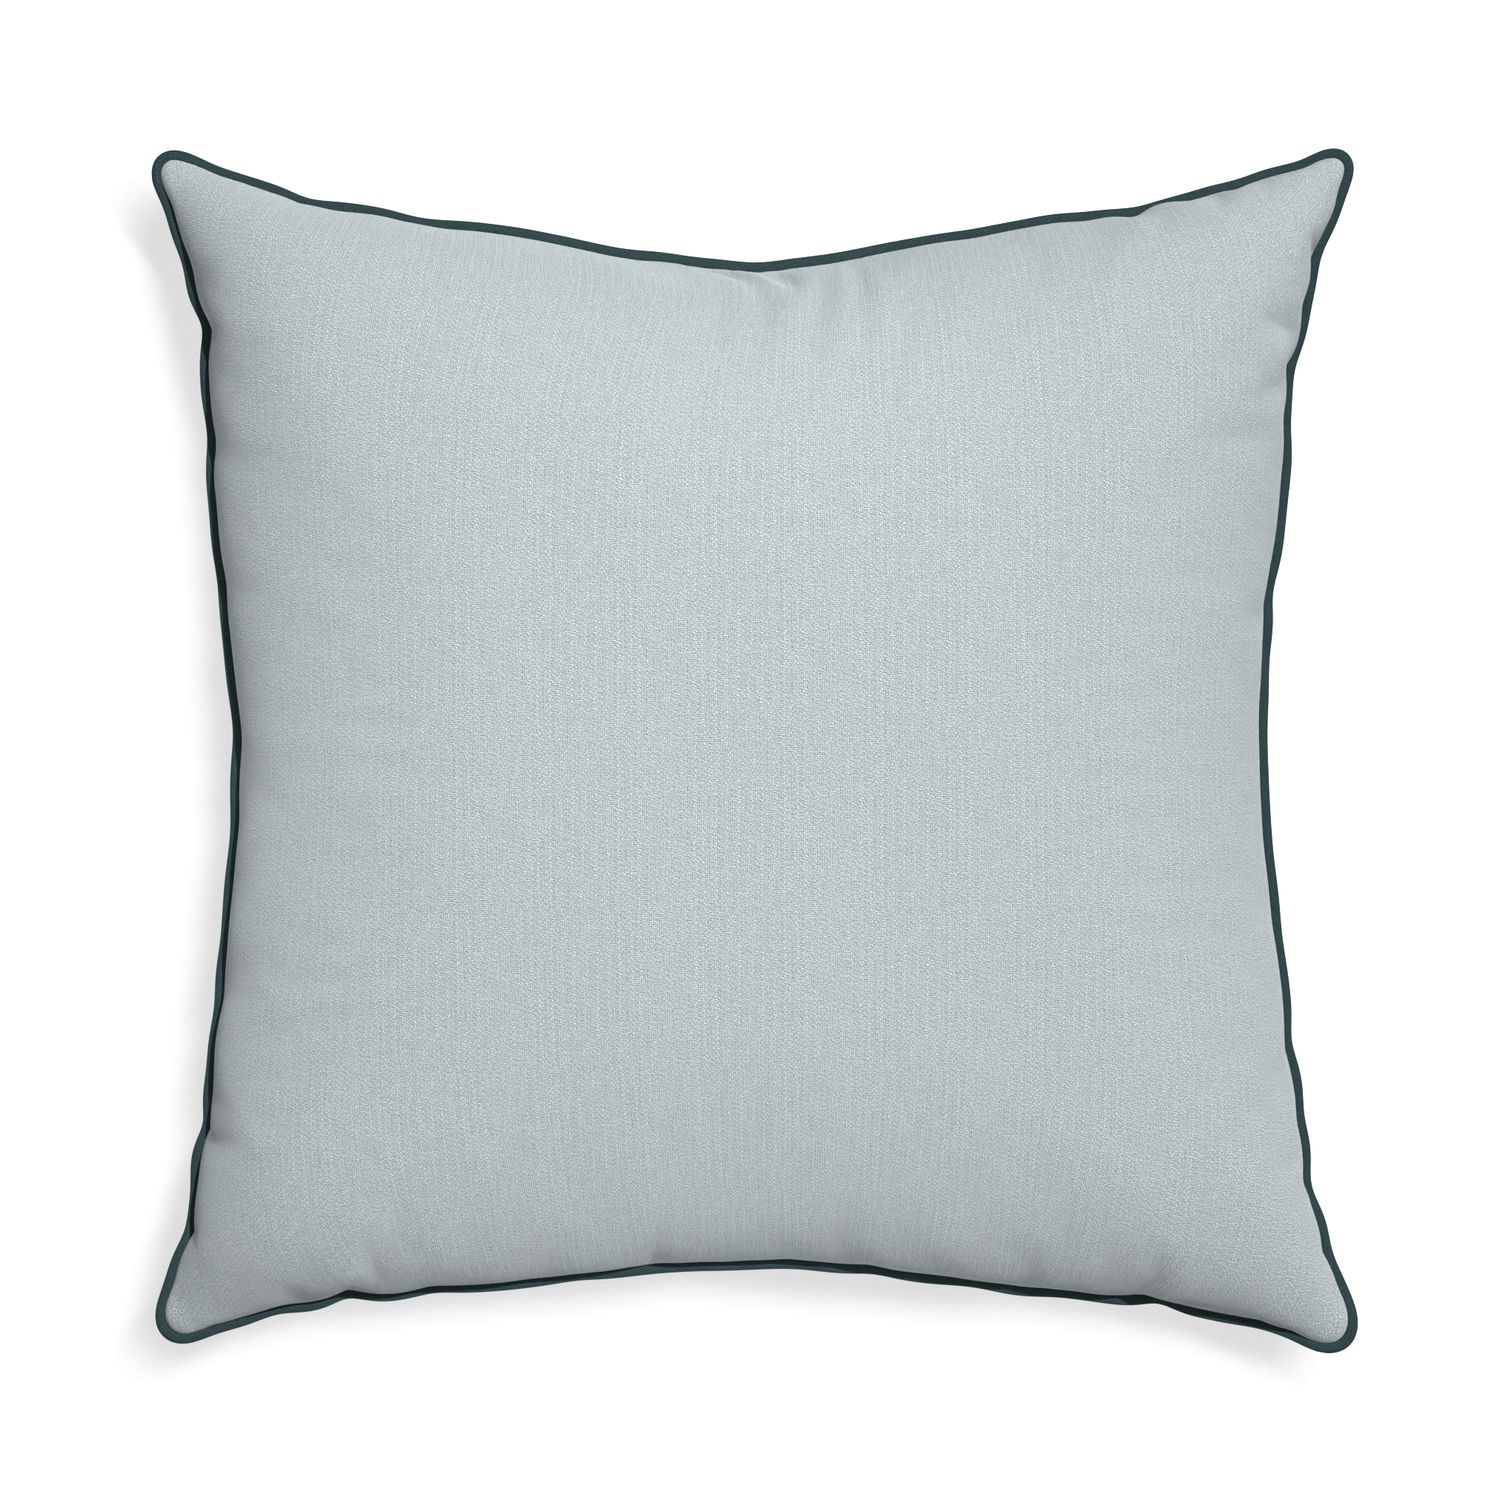 Euro-sham sea custom grey bluepillow with p piping on white background